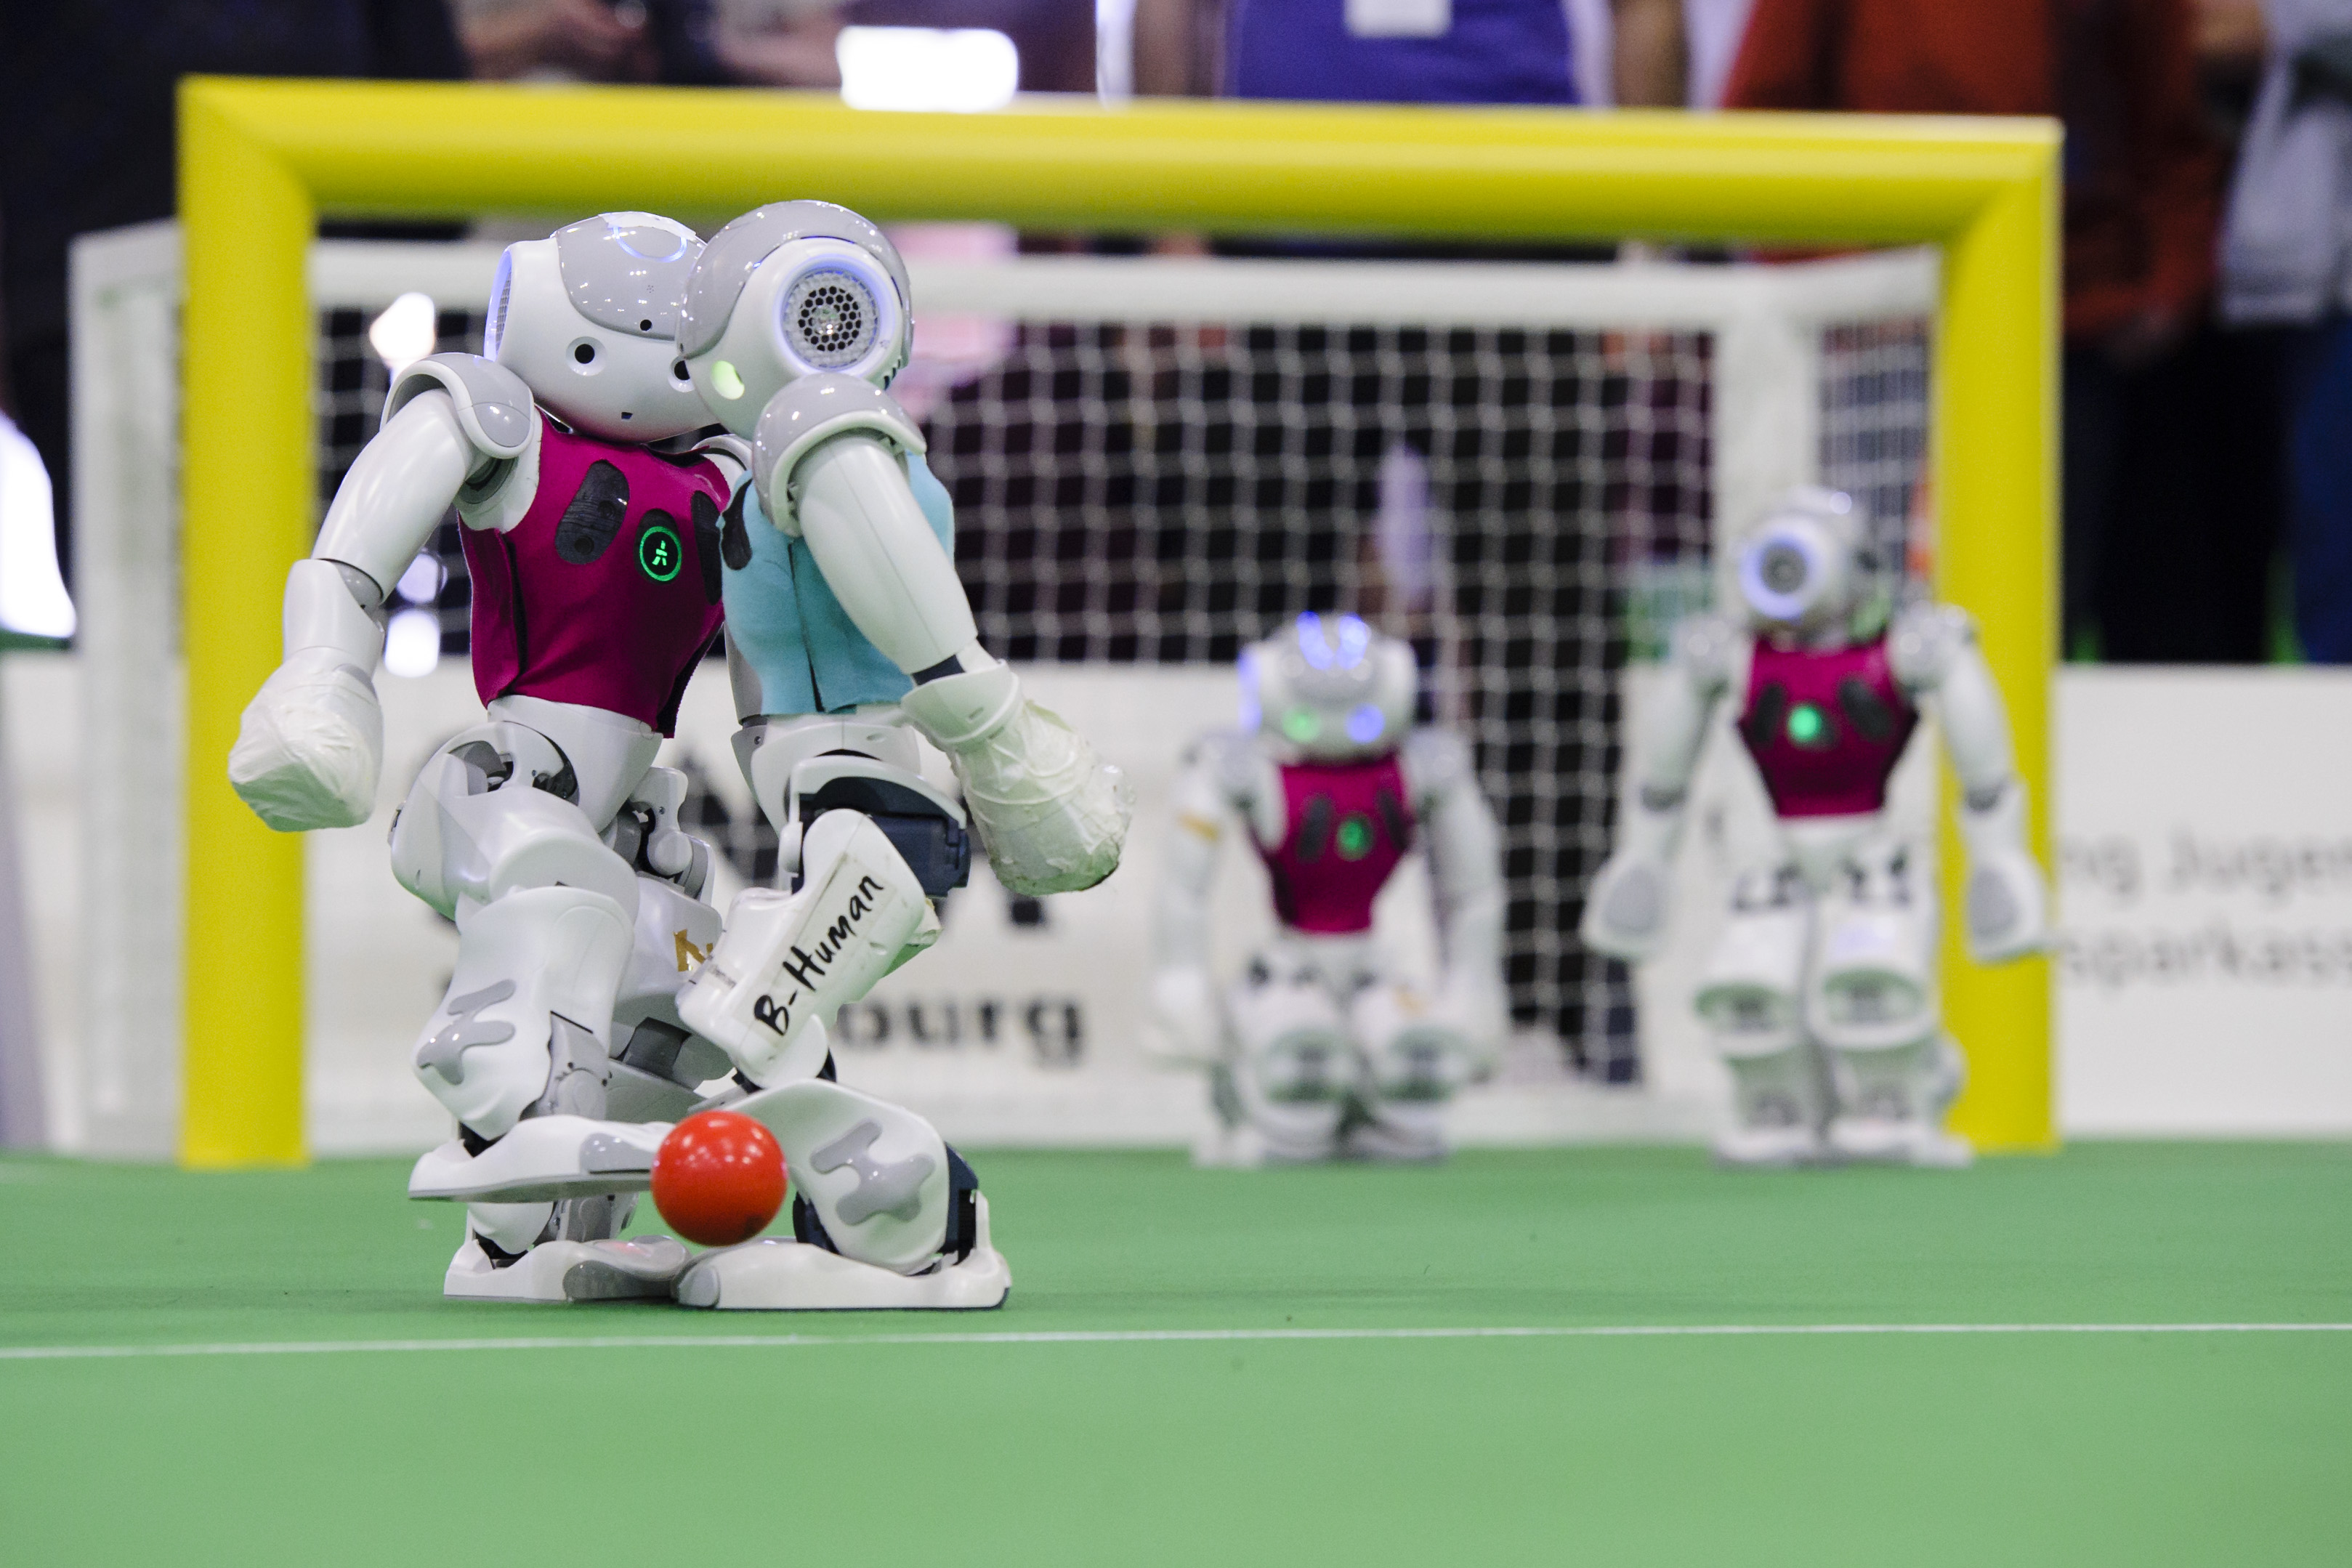 Two teams of NAO robots compete in the 2014 RoboCup German Open tournament. (Photo by Jens Schlueter/Getty Images)